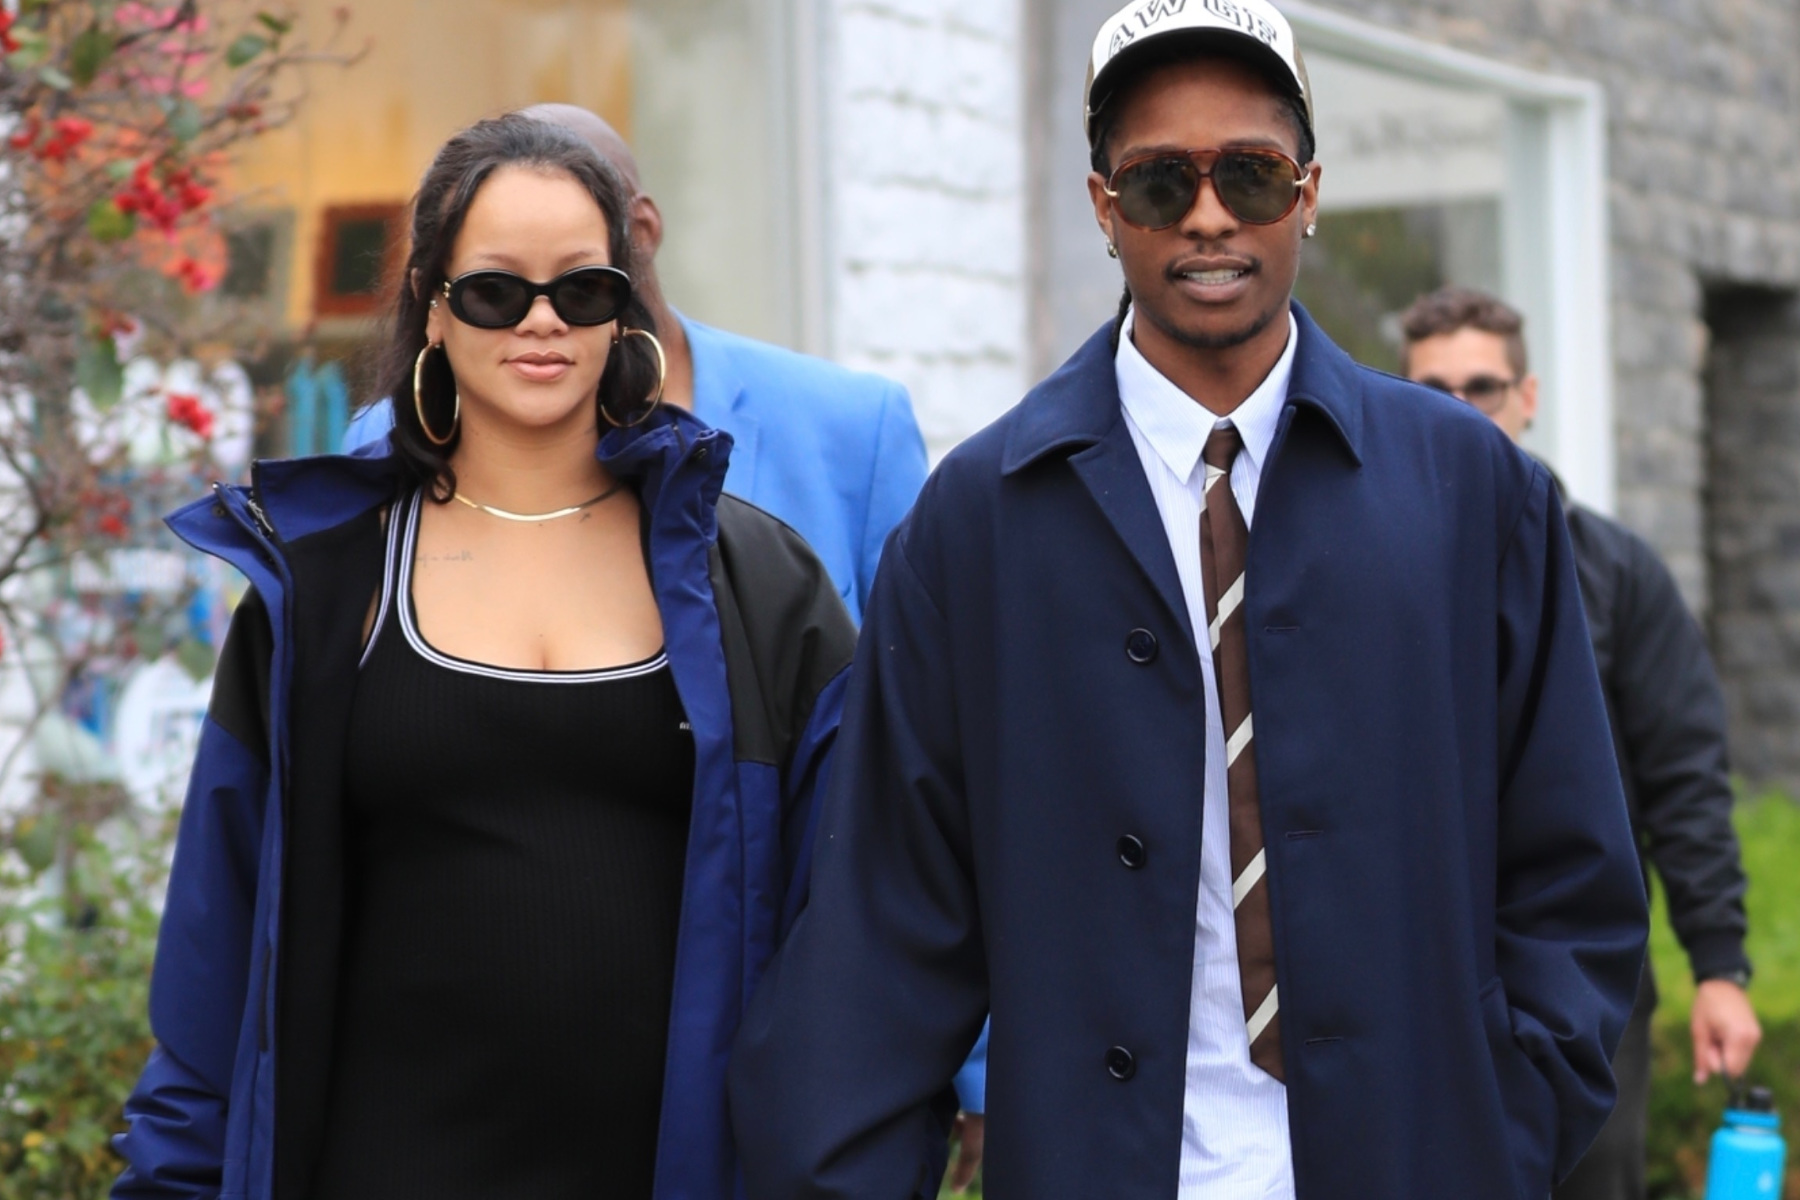 A$AP Rocky & Rihanna's matching LOEWE ensembles are yet another example of the couple's enviable & undeniable sartorial synergy.